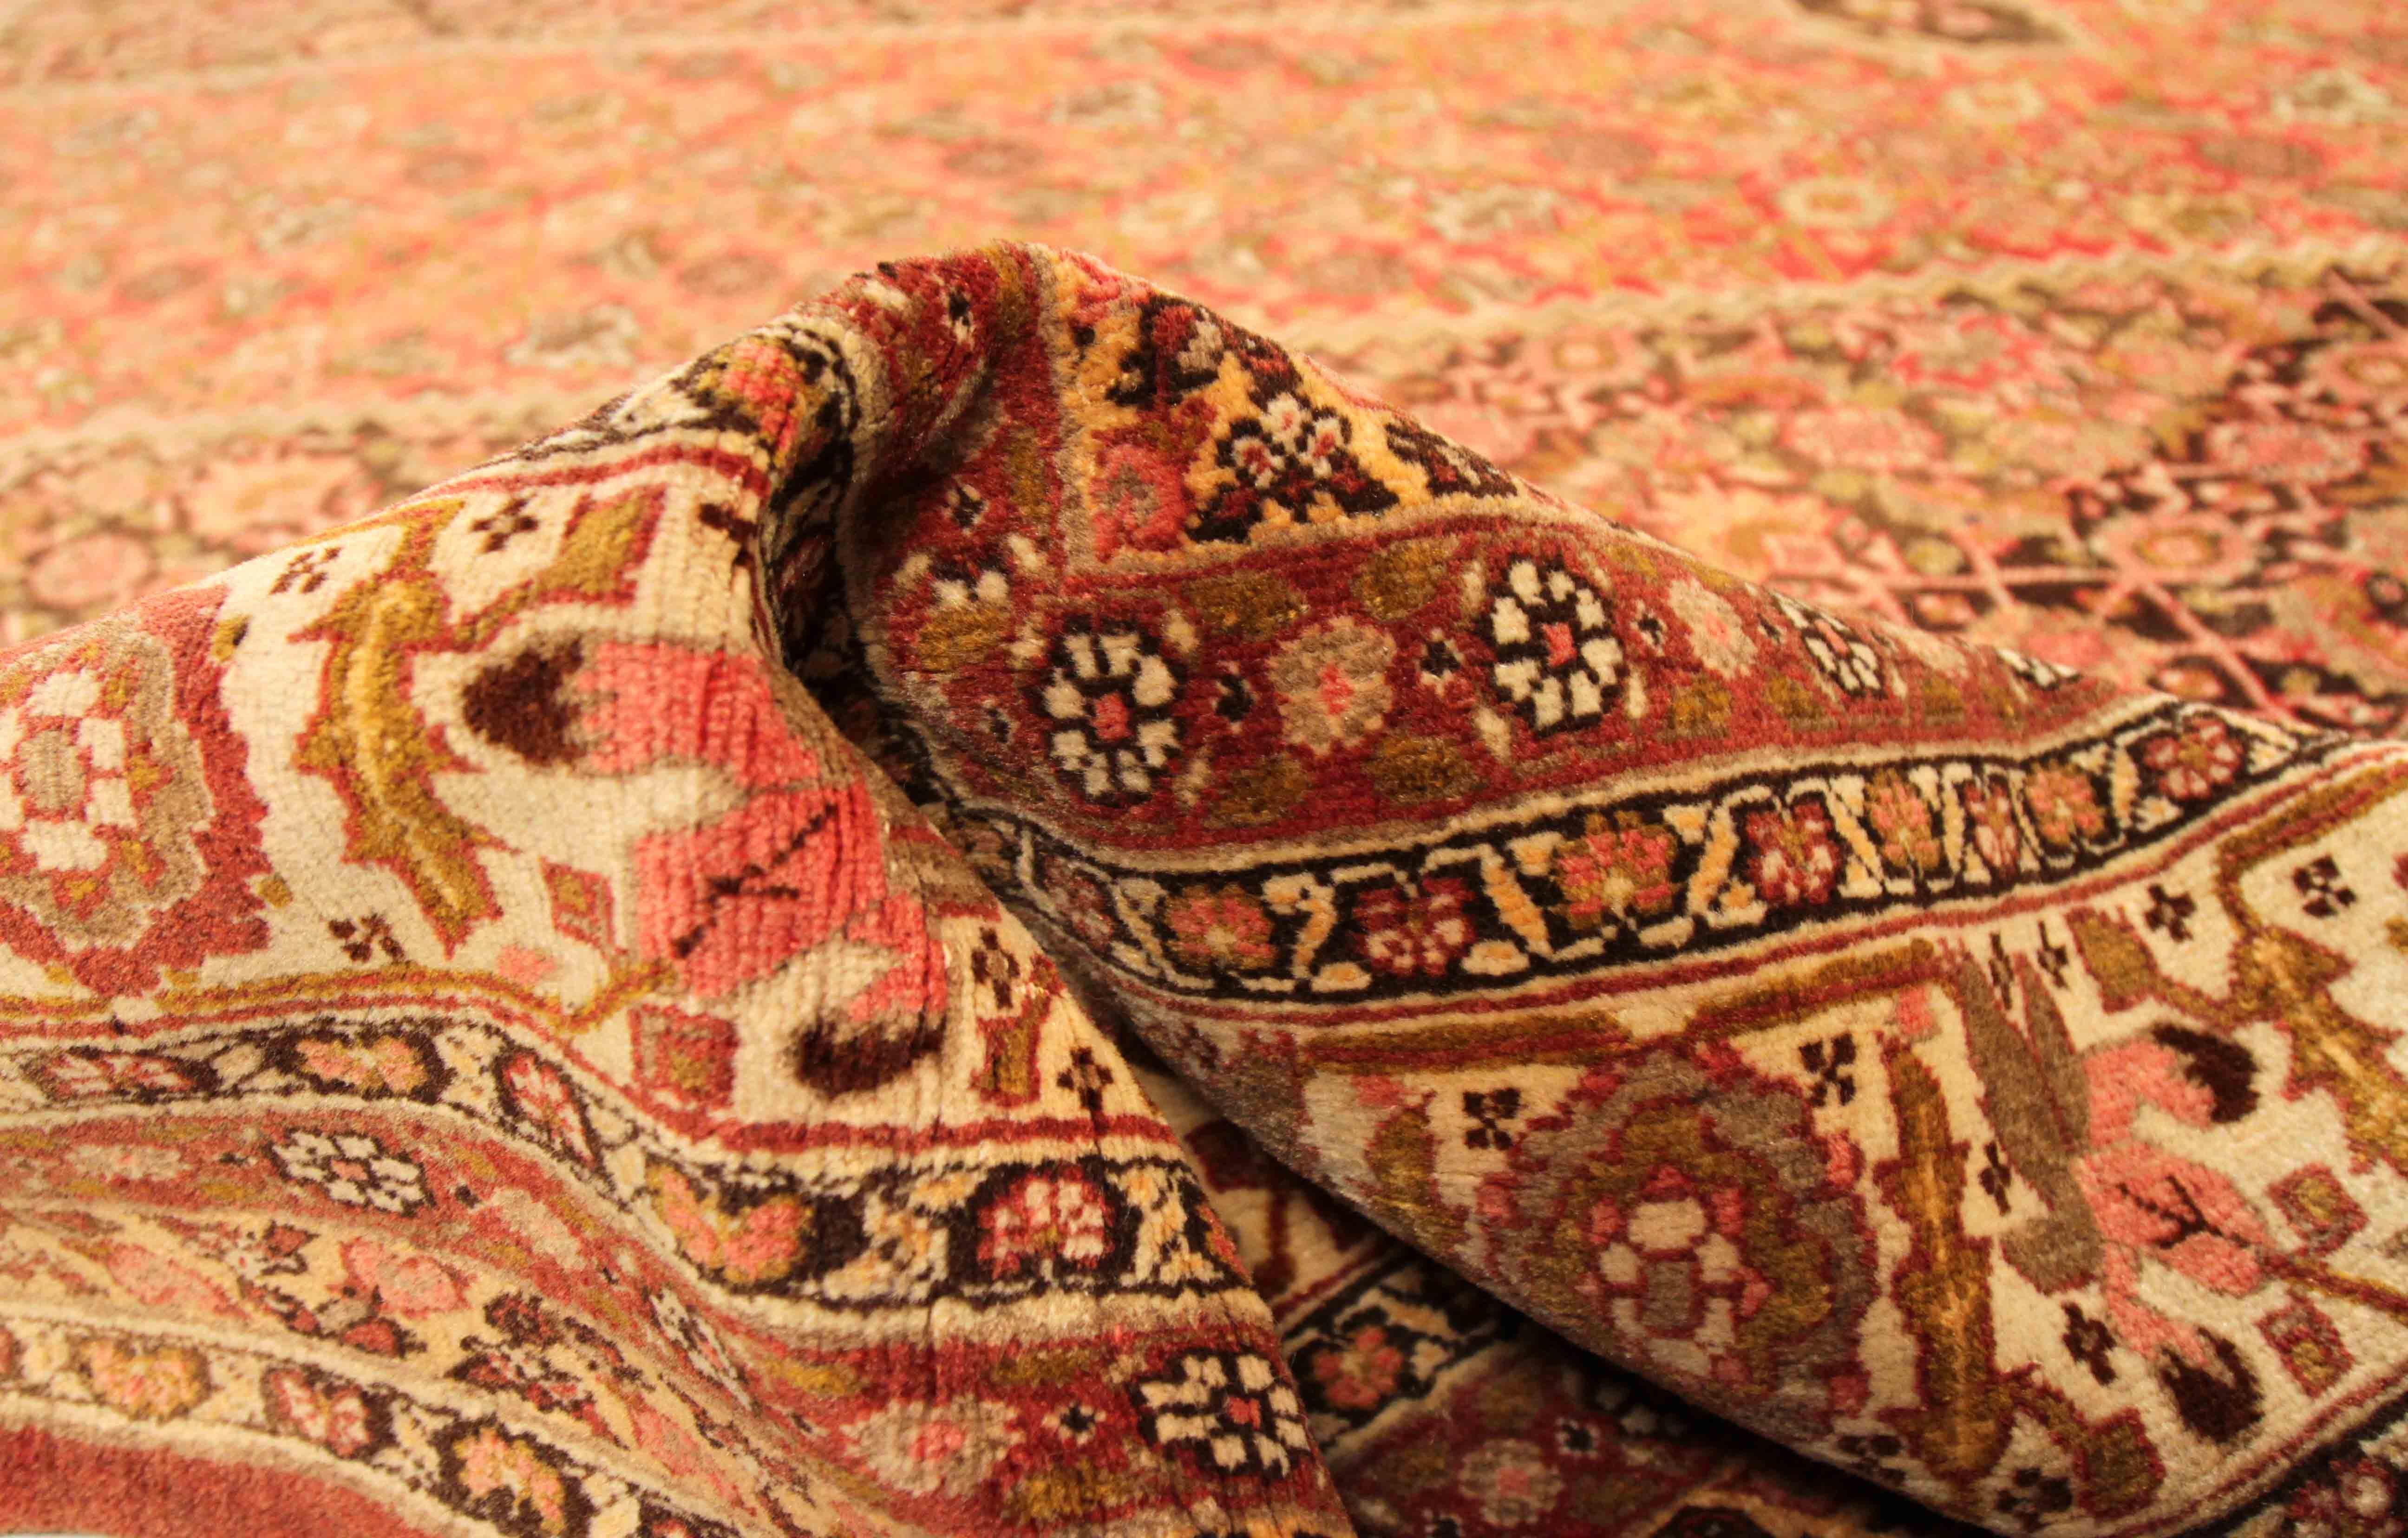 Antique Persian rug handmade in the 1910s. Crafted with the highest quality of wool and colorful vegetable dyes that are 100% organic. It features large diamond patterns filled with floral details in black, red, and ivory. It’s a Tabriz weave which